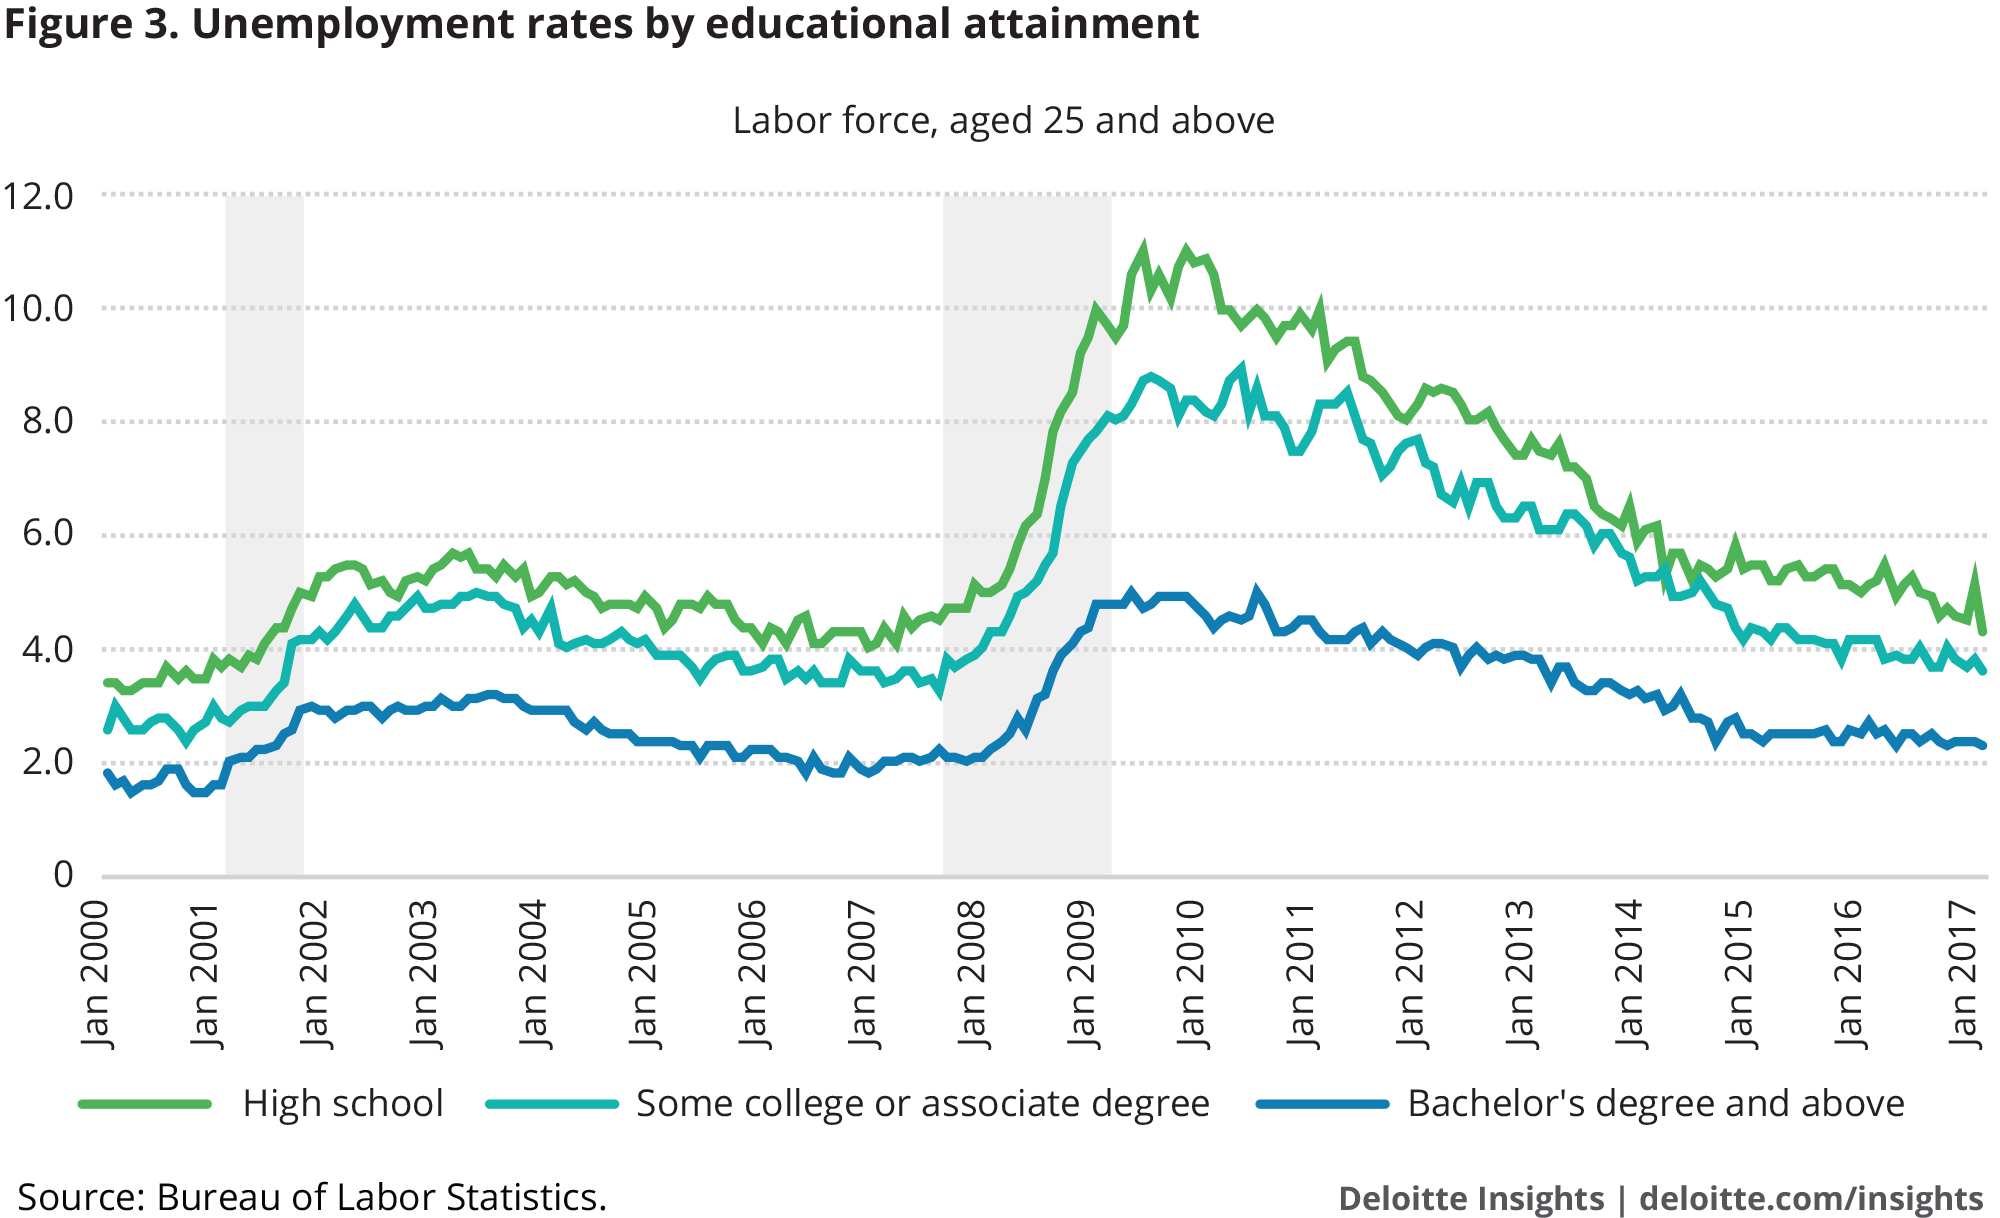 Unemployment rates by educational attainment